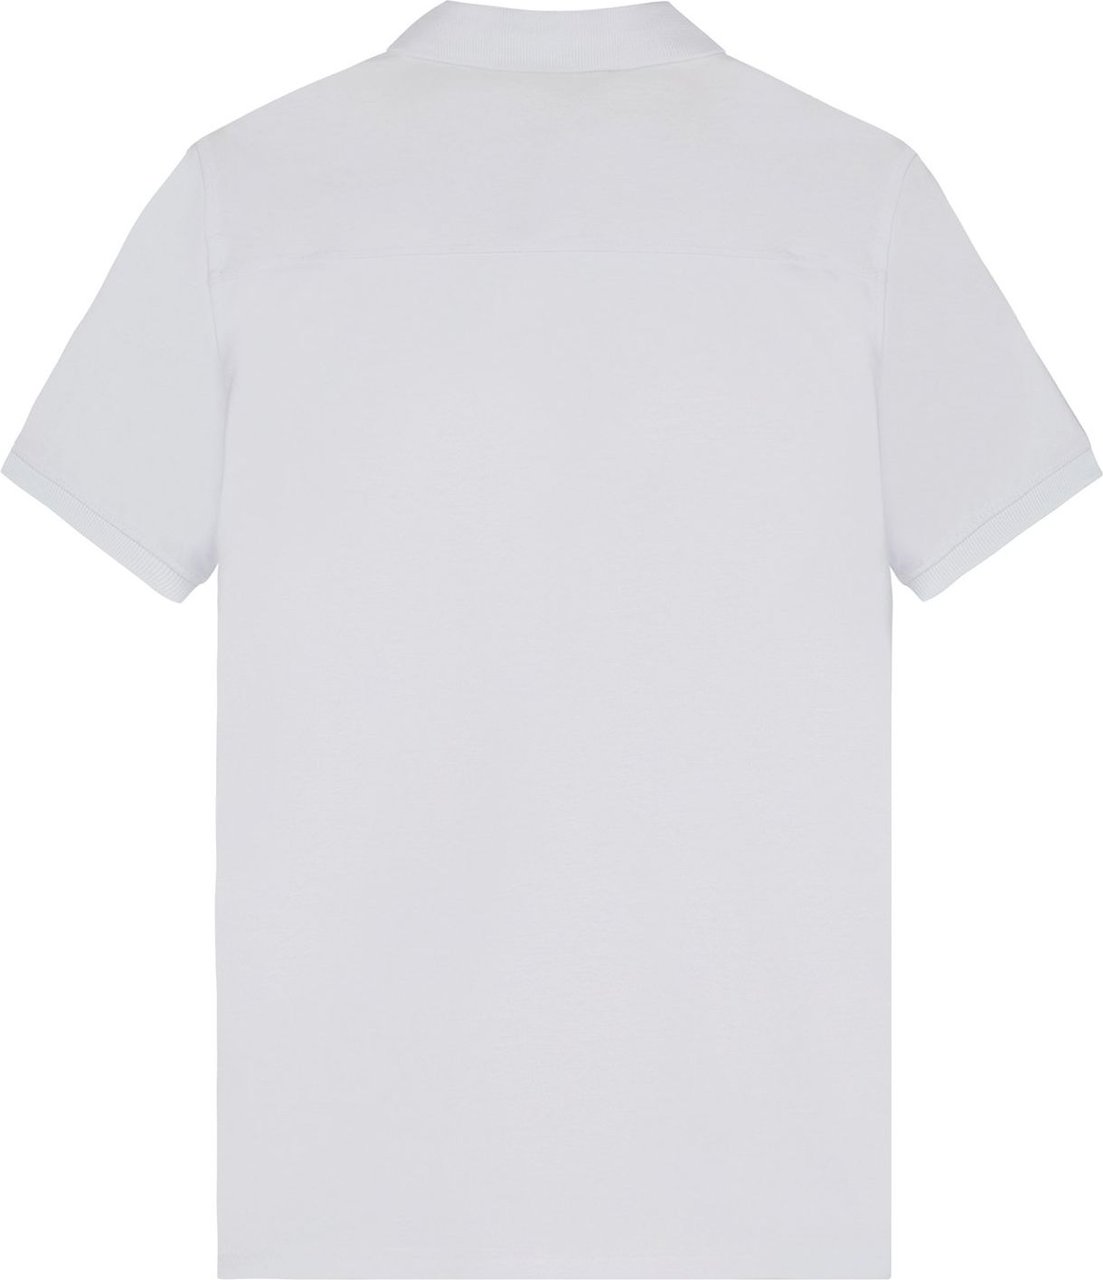 Malelions Signature Polo - White Wit